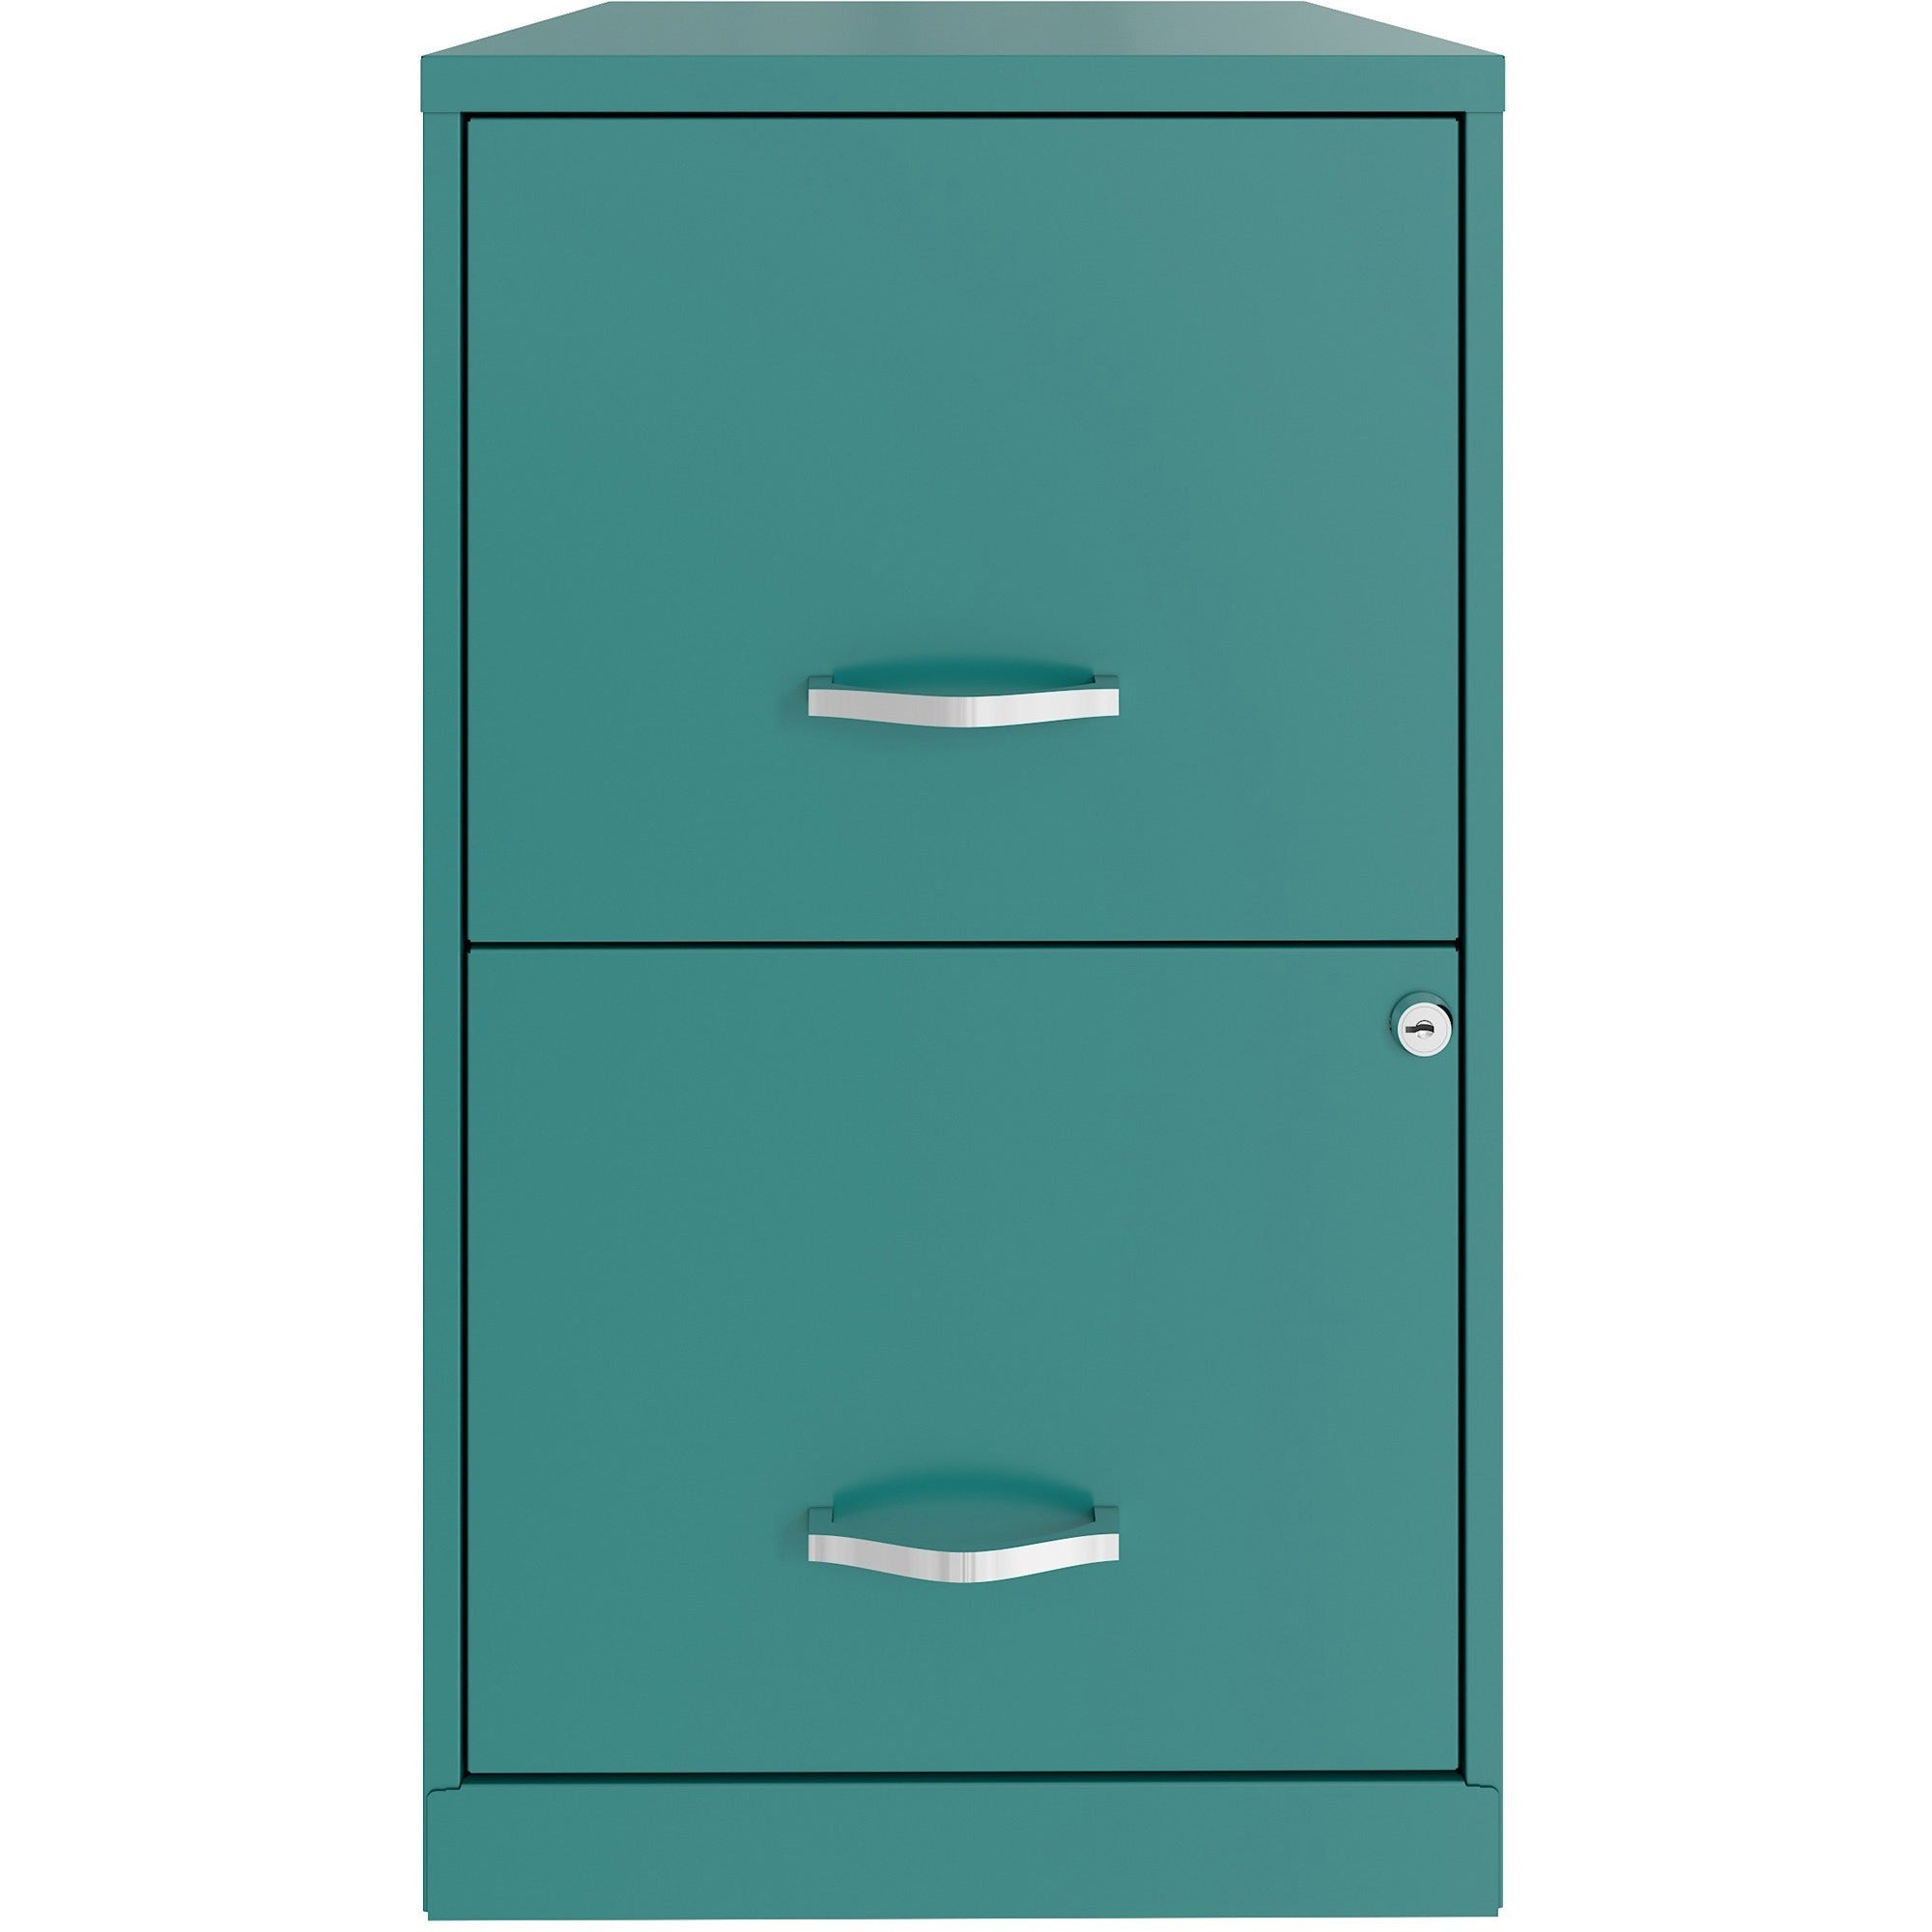 nusparc-file-cabinet-142-x-18-x-245-2-x-drawers-for-file-letter-vertical-locking-drawer-glide-suspension-nonporous-surface-teal-baked-enamel-steel-recycled_nprvf218aatl - 2